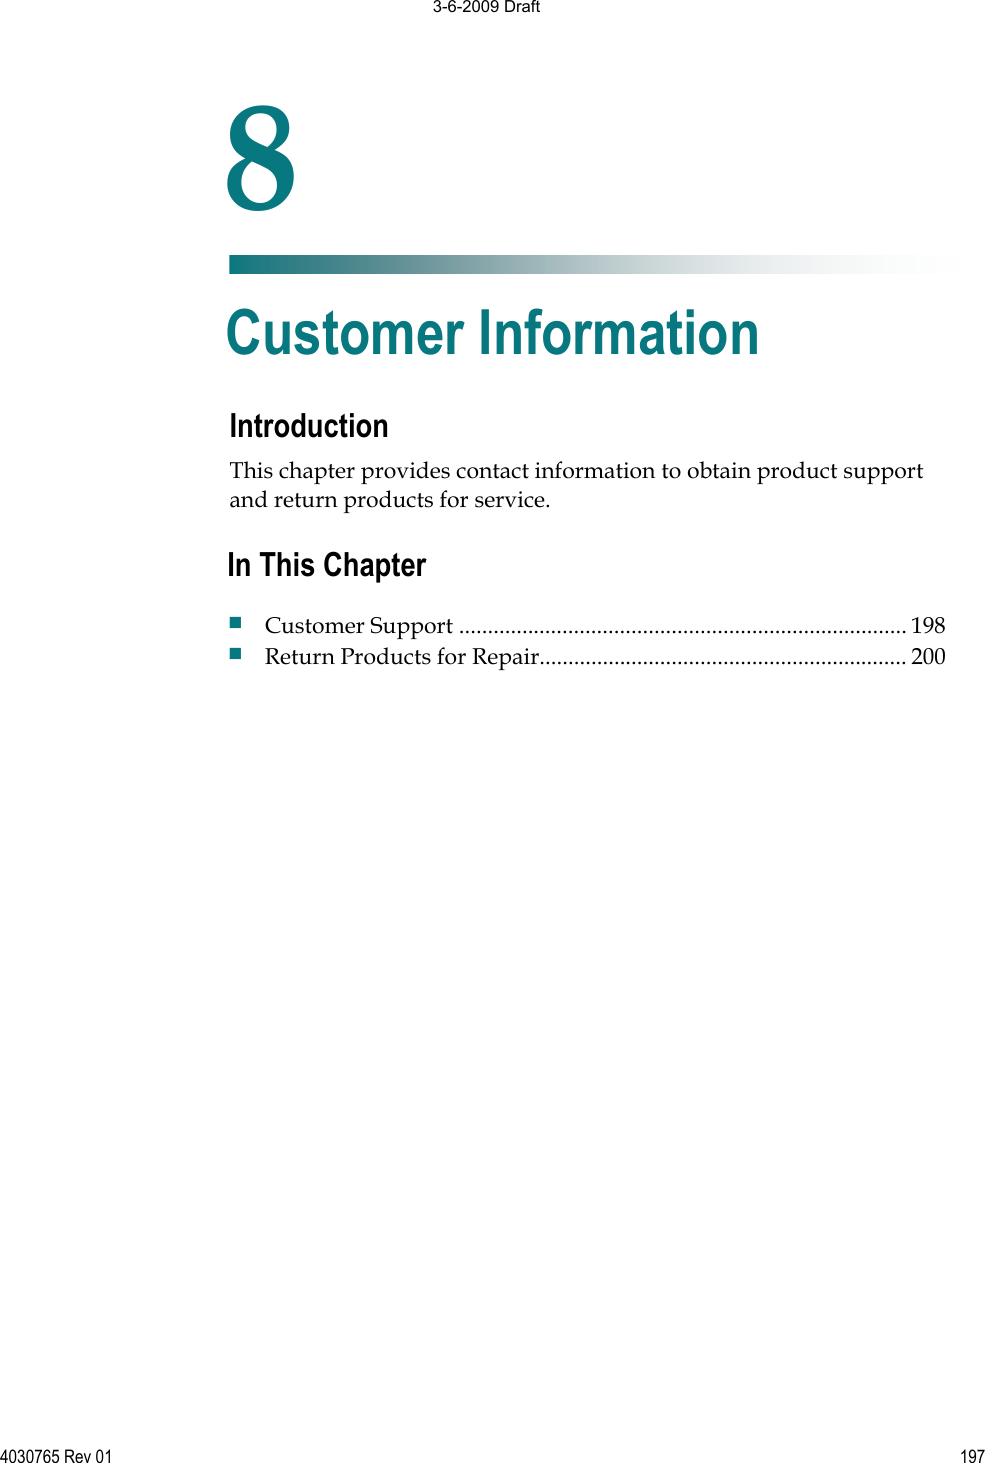 4030765 Rev 01 197Introduction This chapter provides contact information to obtain product support and return products for service. 8Chapter 8Customer Information In This Chapter Customer Support .............................................................................. 198 Return Products for Repair................................................................ 200 3-6-2009 Draft